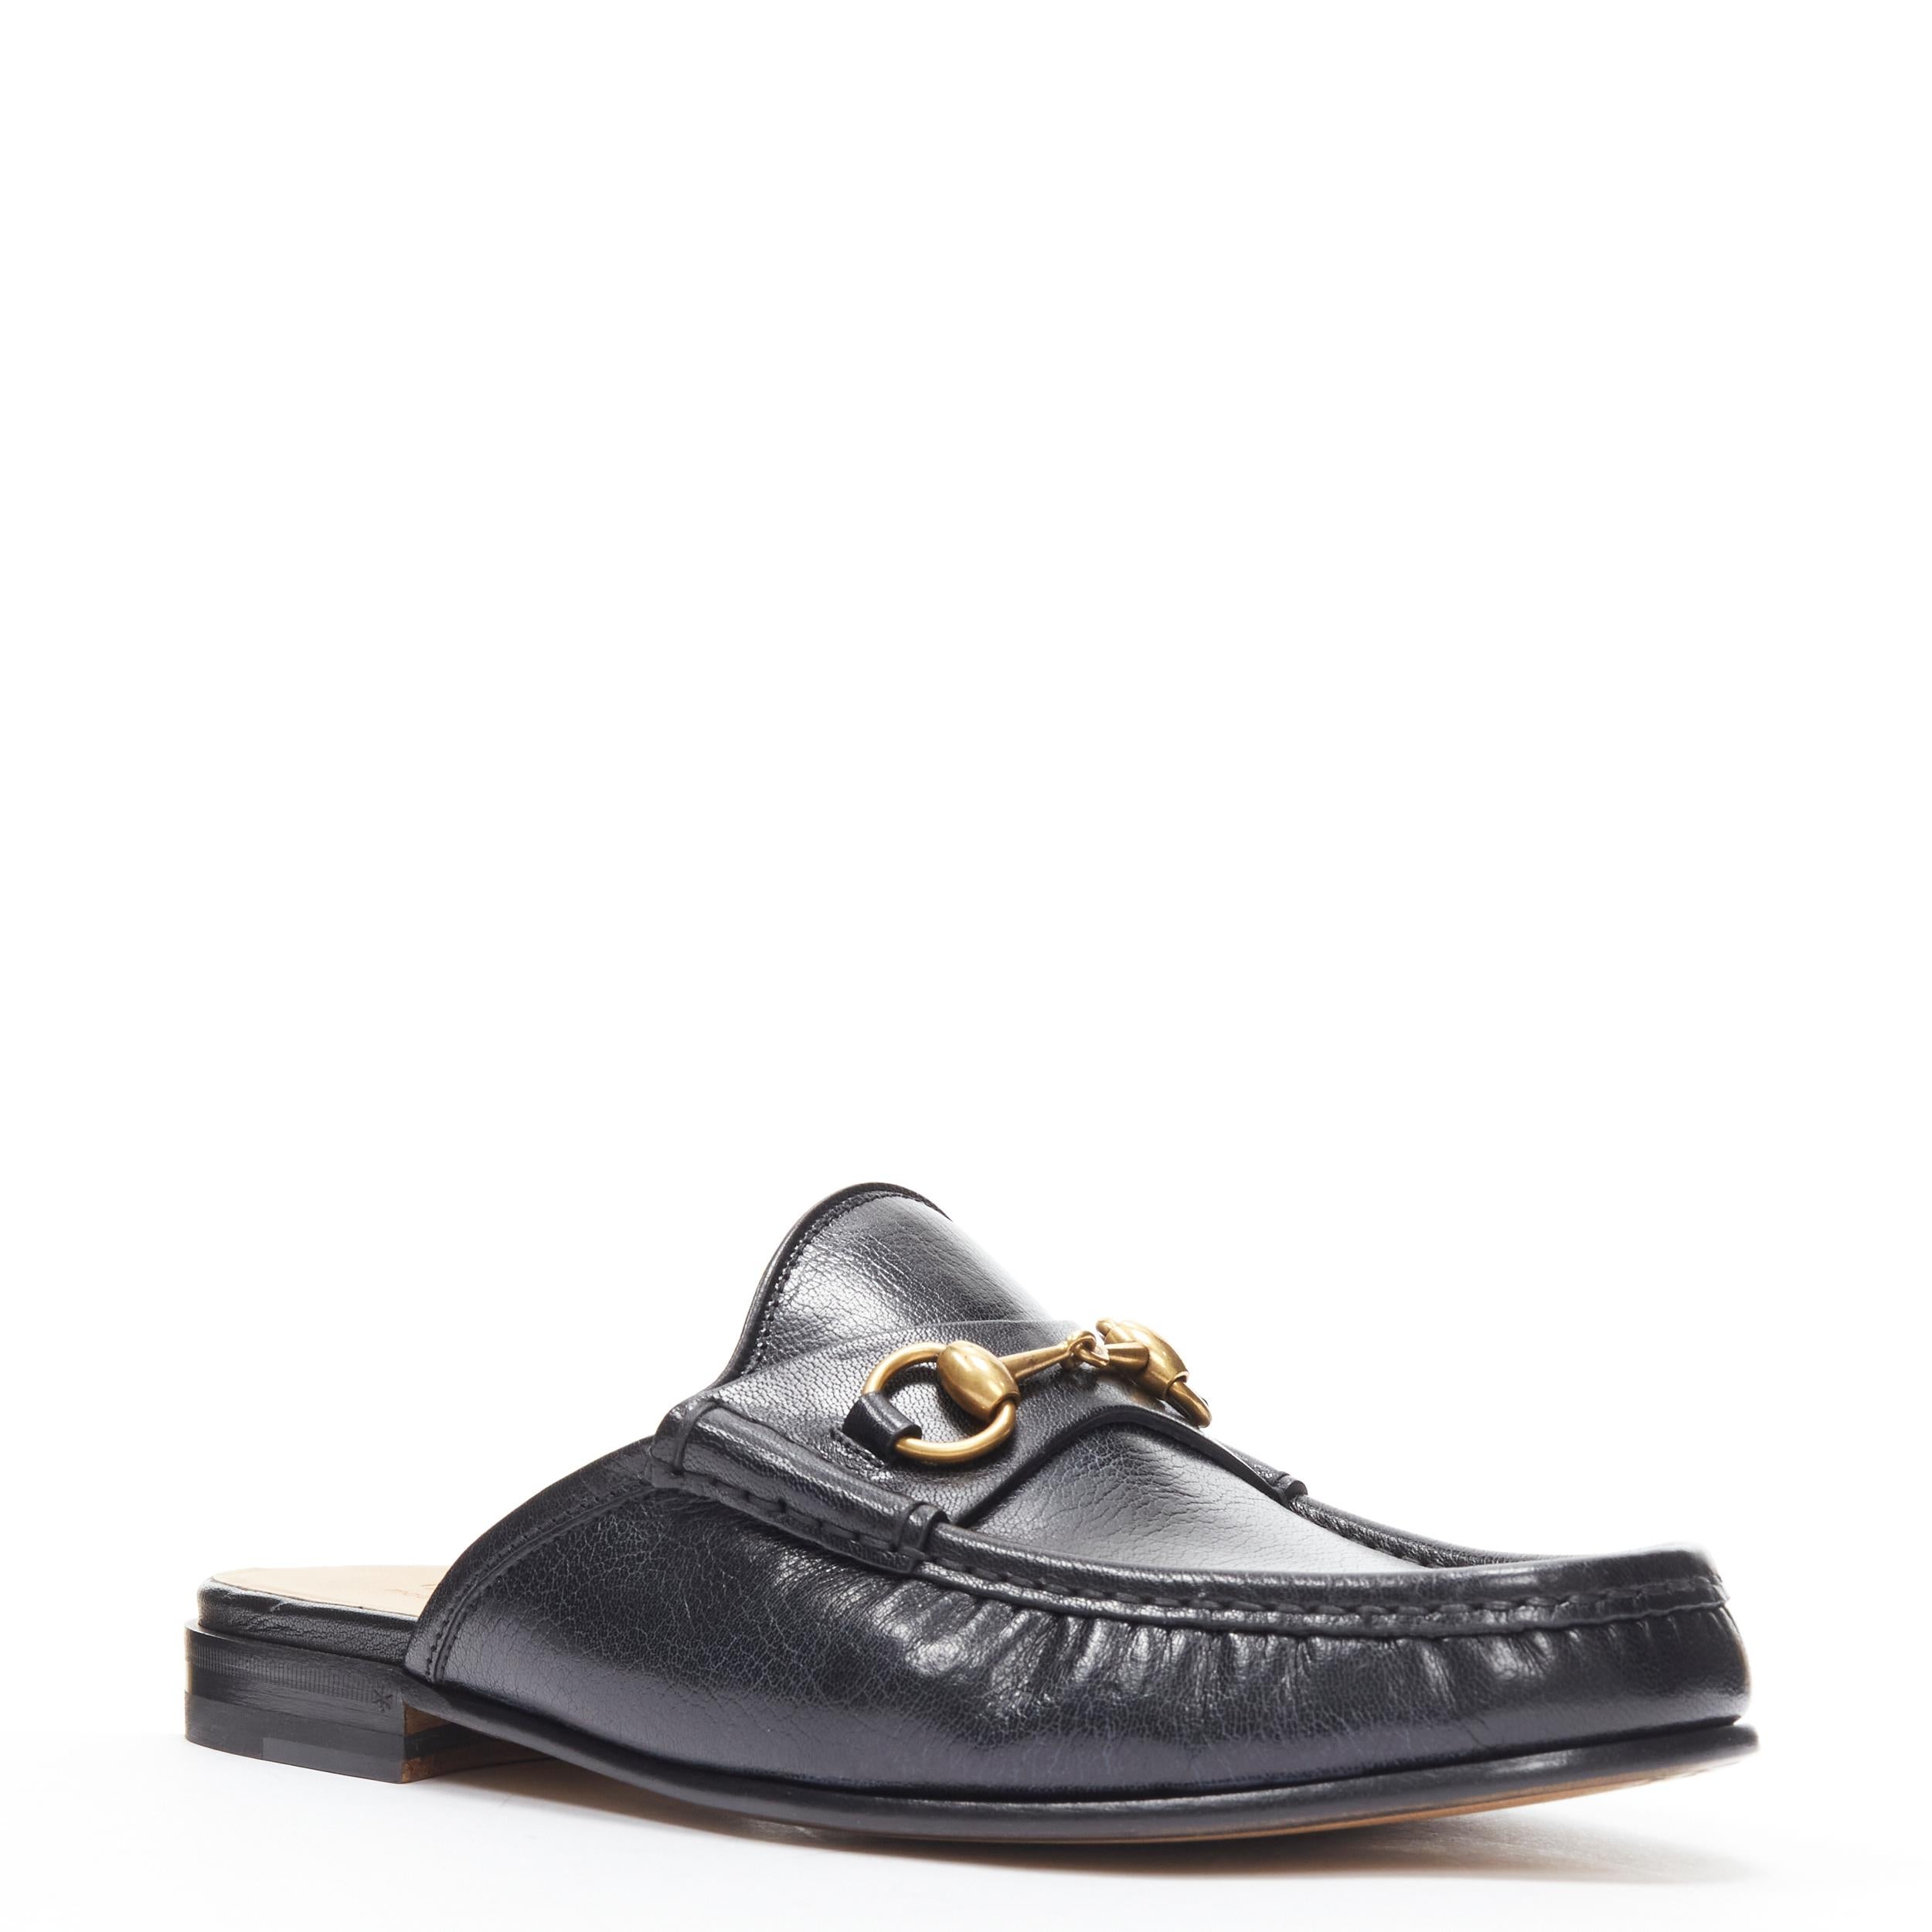 new GUCCI Quentin Nero black leather gold Horsebit slip on loafer UK9 US10 EU43 
Reference: TGAS/B02140 
Brand: Gucci 
Designer: Alessandro Michele 
Model: Quentin 
Material: Leather 
Color: Black 
Pattern: Solid 
Extra Detail: Quentin. Black